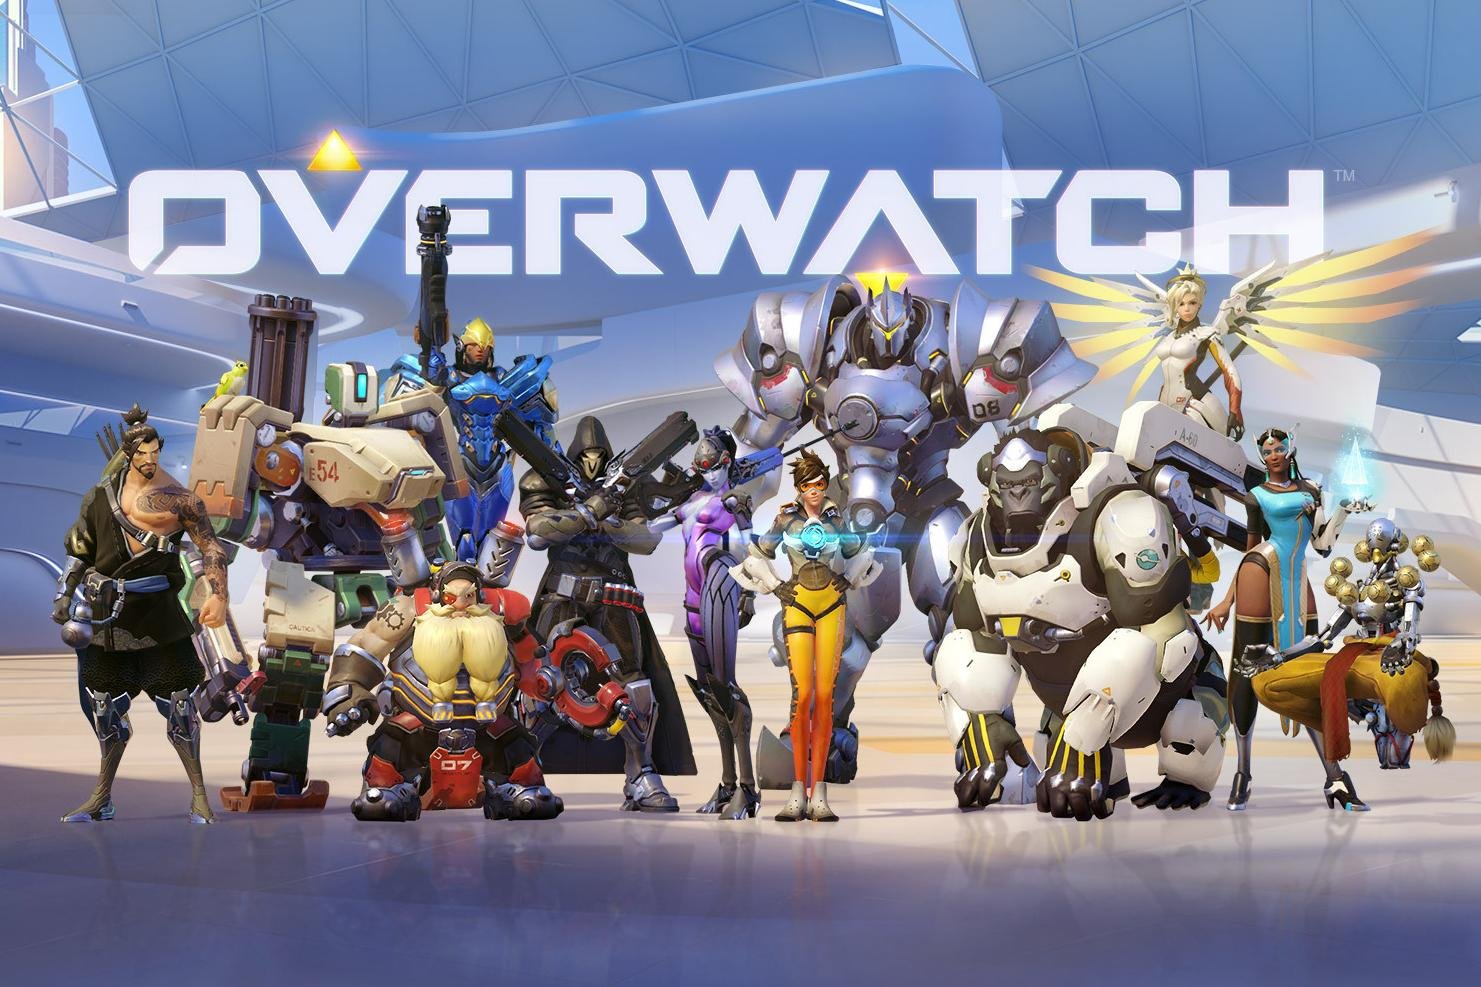 overwatch is the new esports shooter game from blizzard